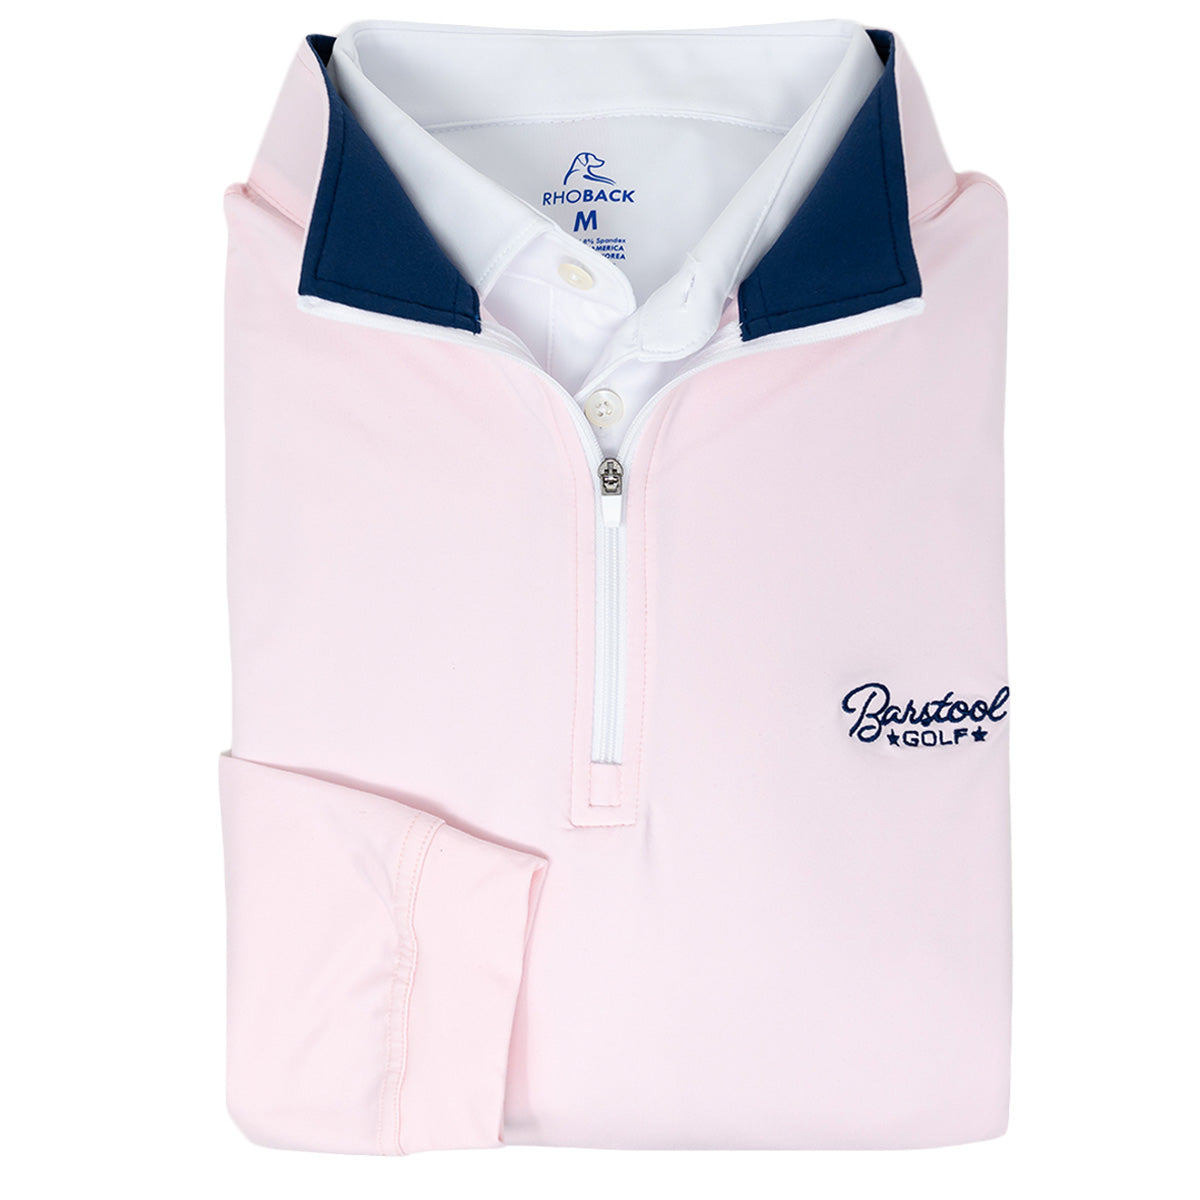 Rhoback x Barstool Golf "The Himalaya" Quarter Zip-Pullovers-Fore Play-Barstool Sports